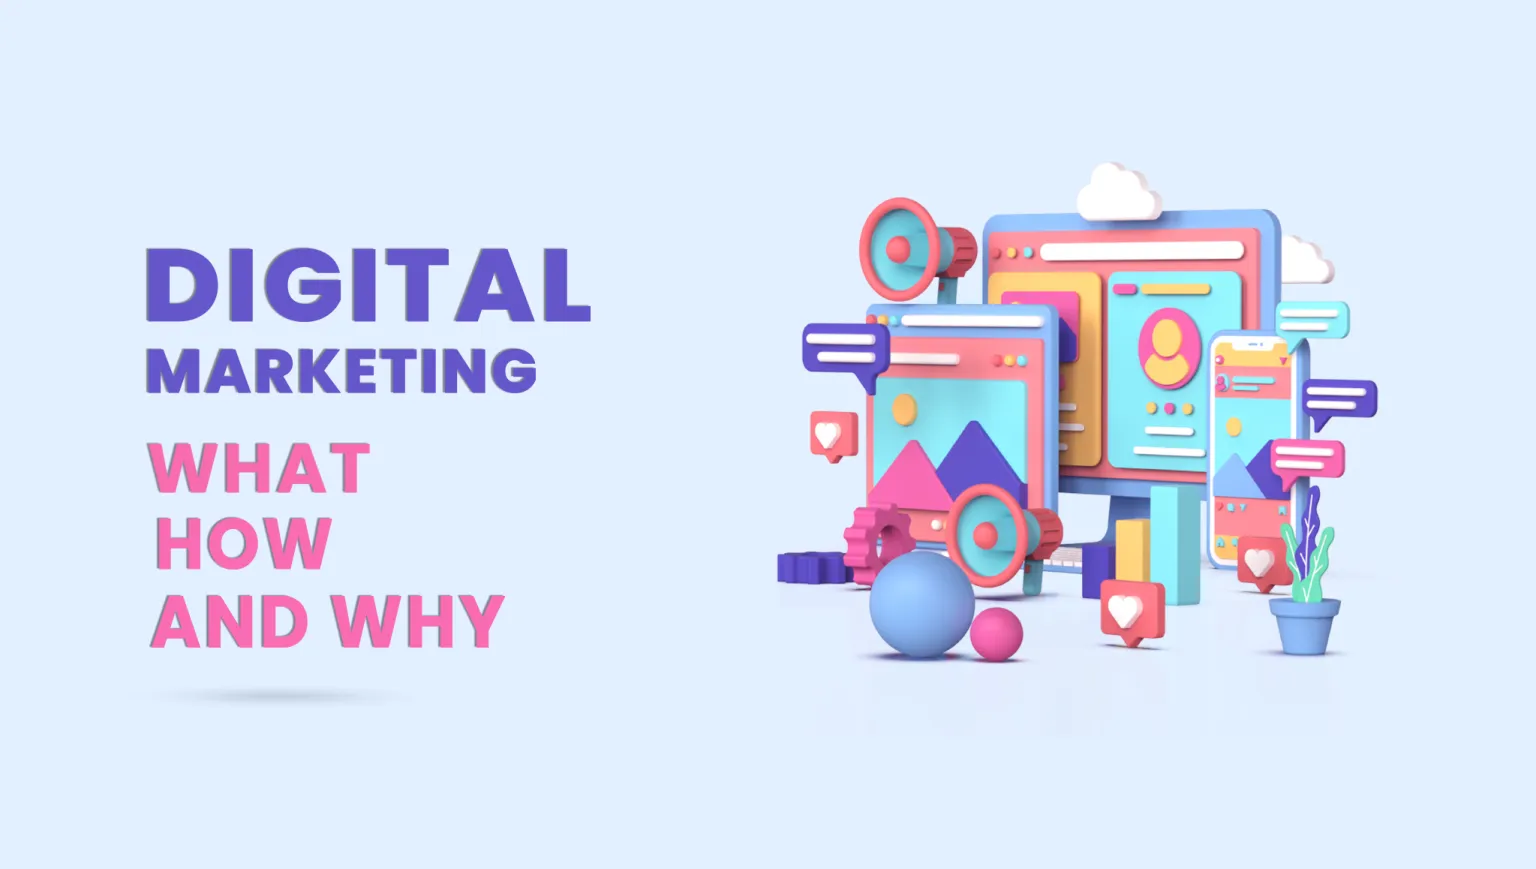 Digital Marketing — What? Why? & How?